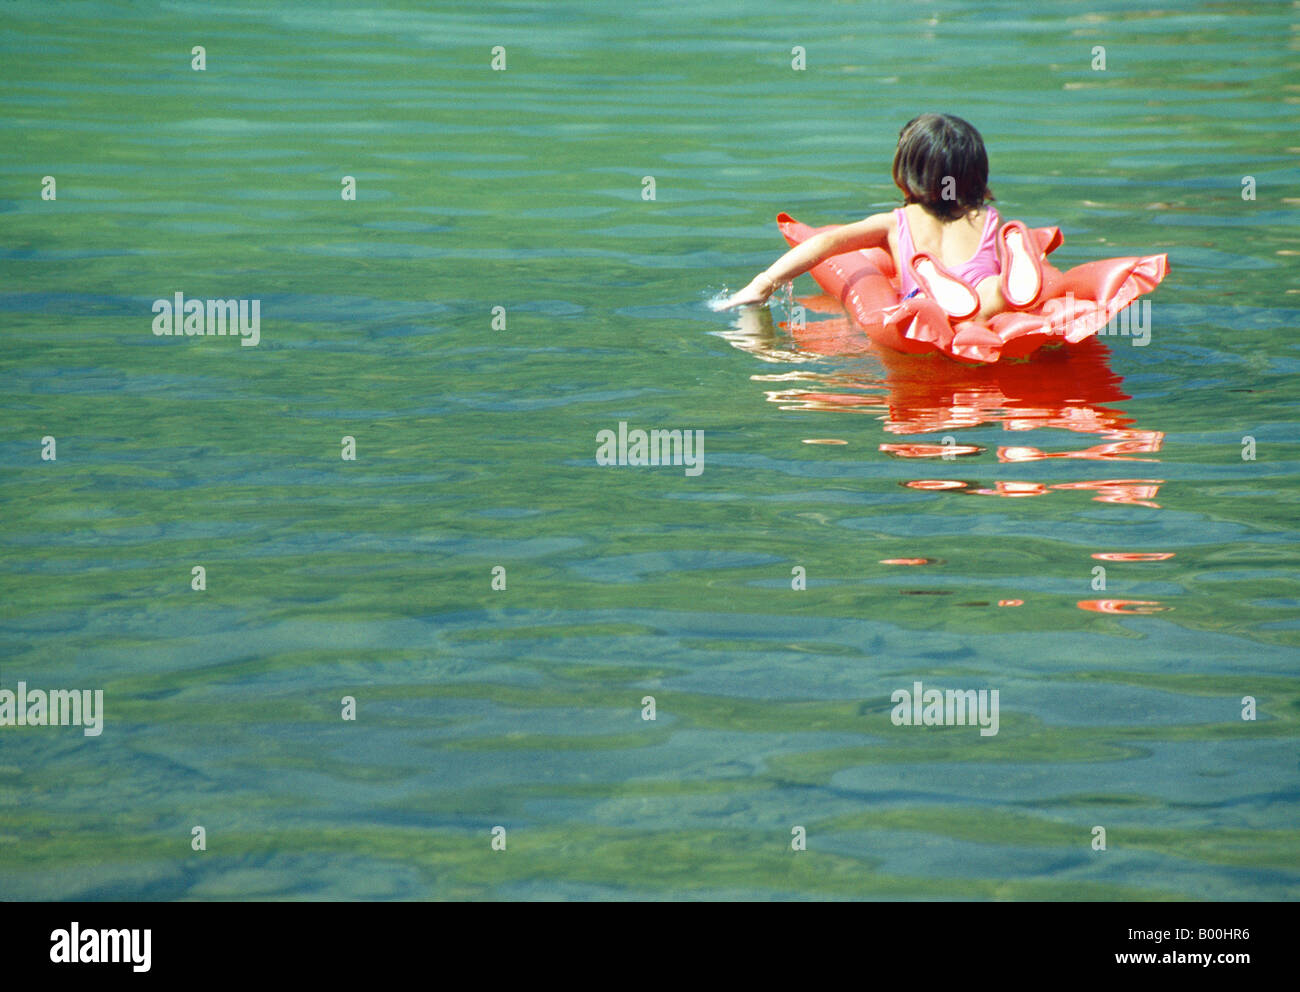 Girl on an air bed on the water. Lago de Sanabria Nature Reserve. Zamora province. Castile Leon. Spain. Stock Photo